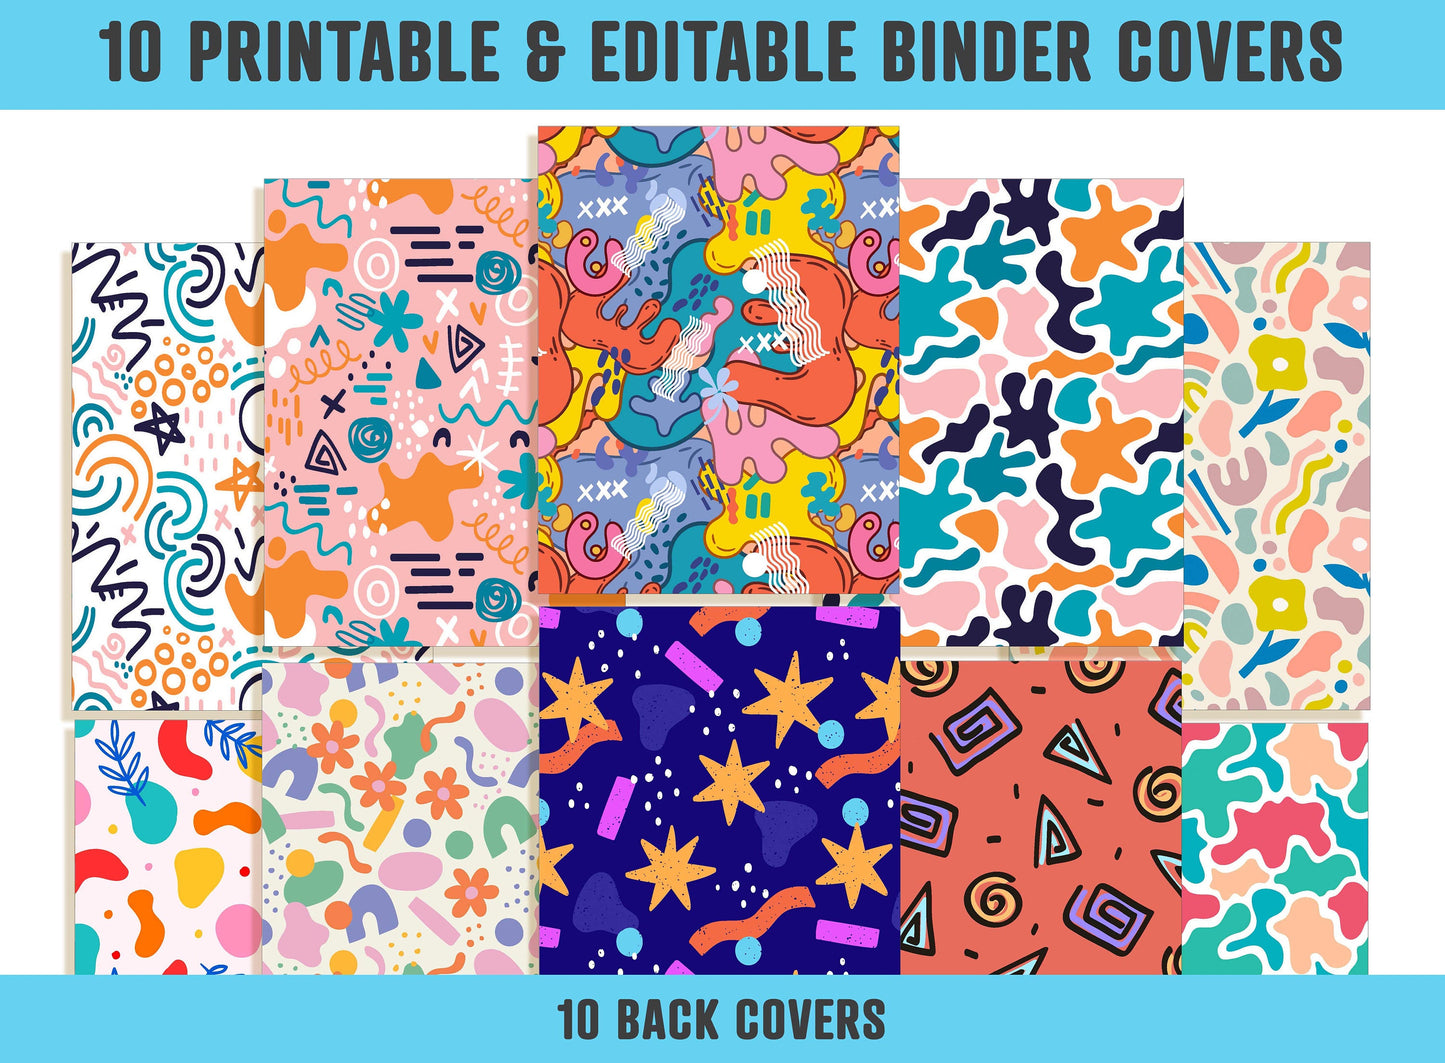 Abstract Binder Cover, 10 Printable & Editable Covers+Spines, Binder Insert, Planner Cover, Teacher Binder, School Binder Cover Template PDF